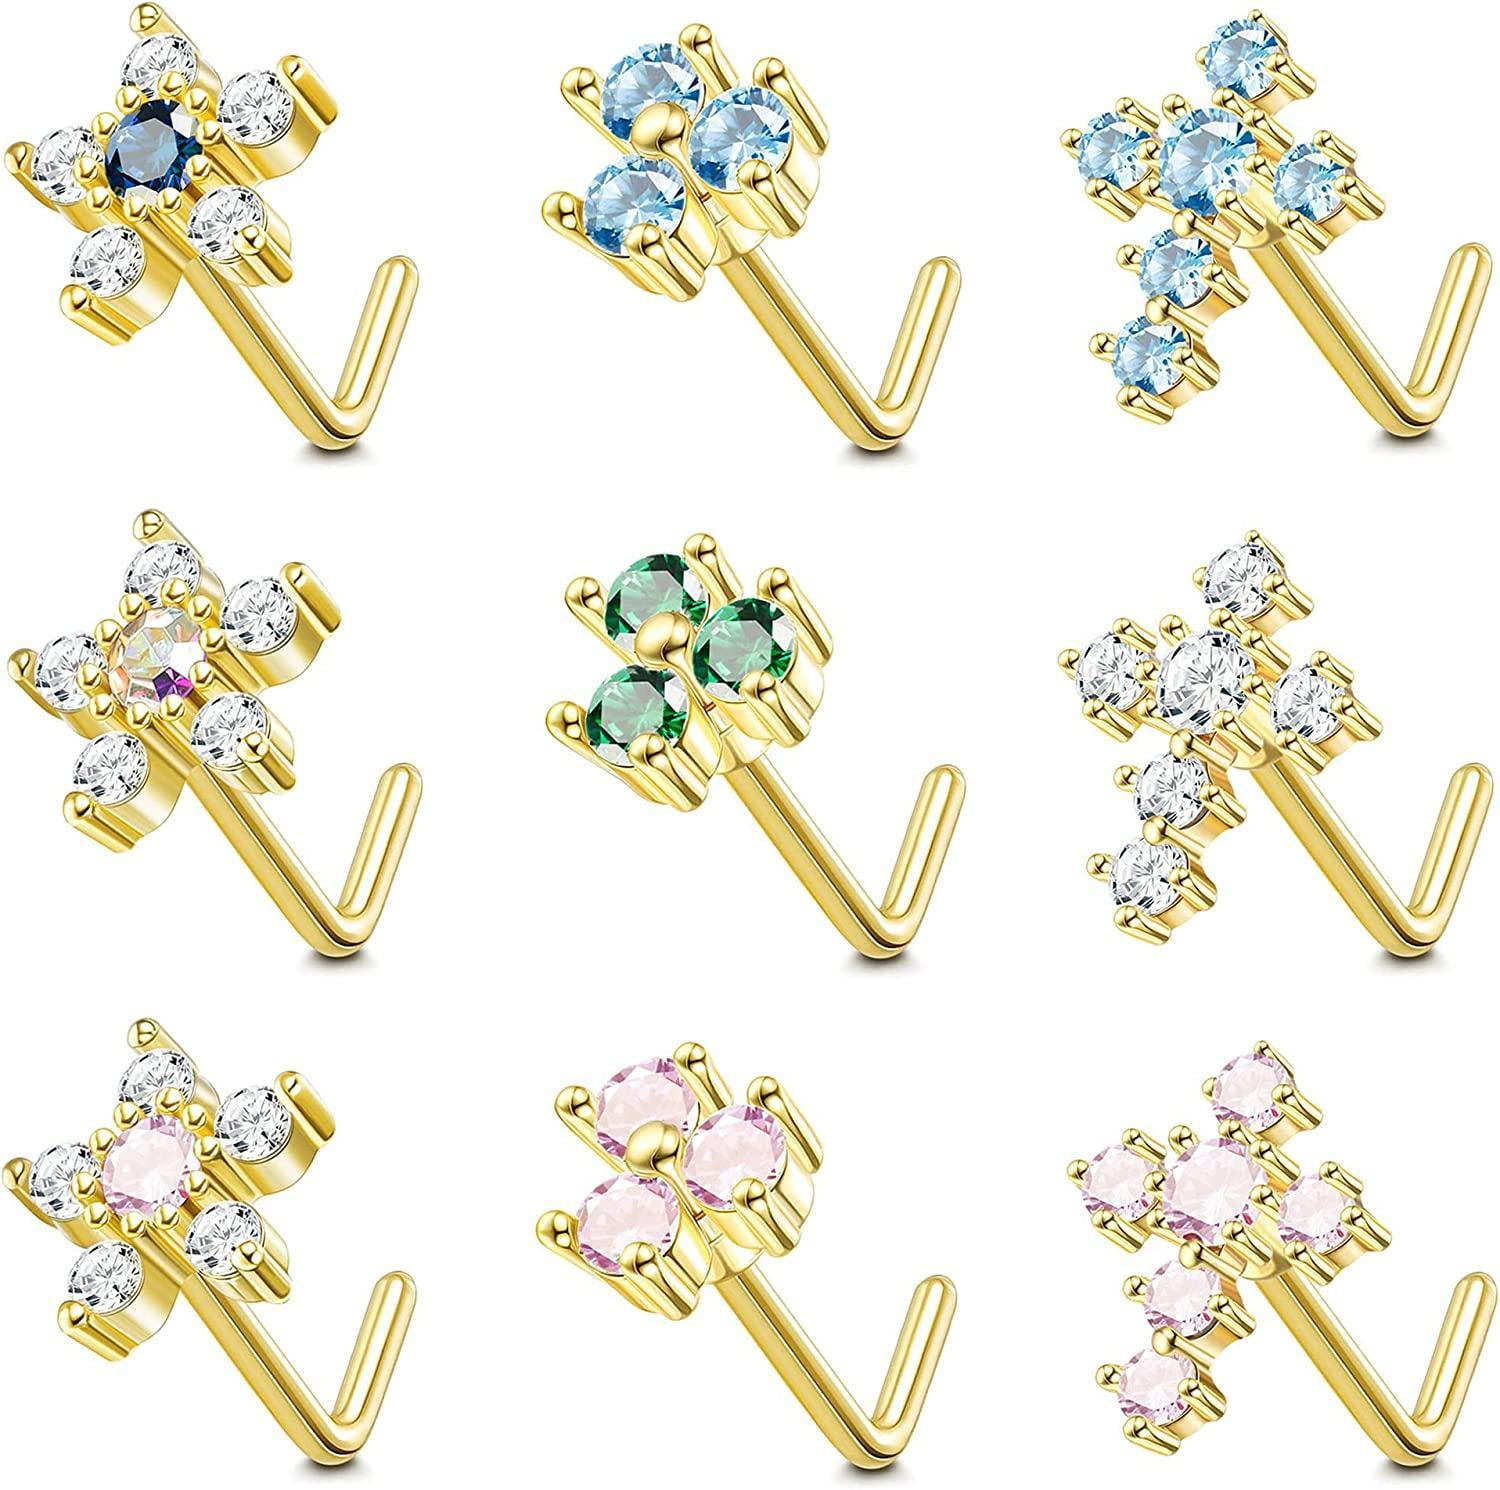 9Pcs 20G Nose Rings Stud L Shaped Nose Rings Stainless CZ Flower Cross ...